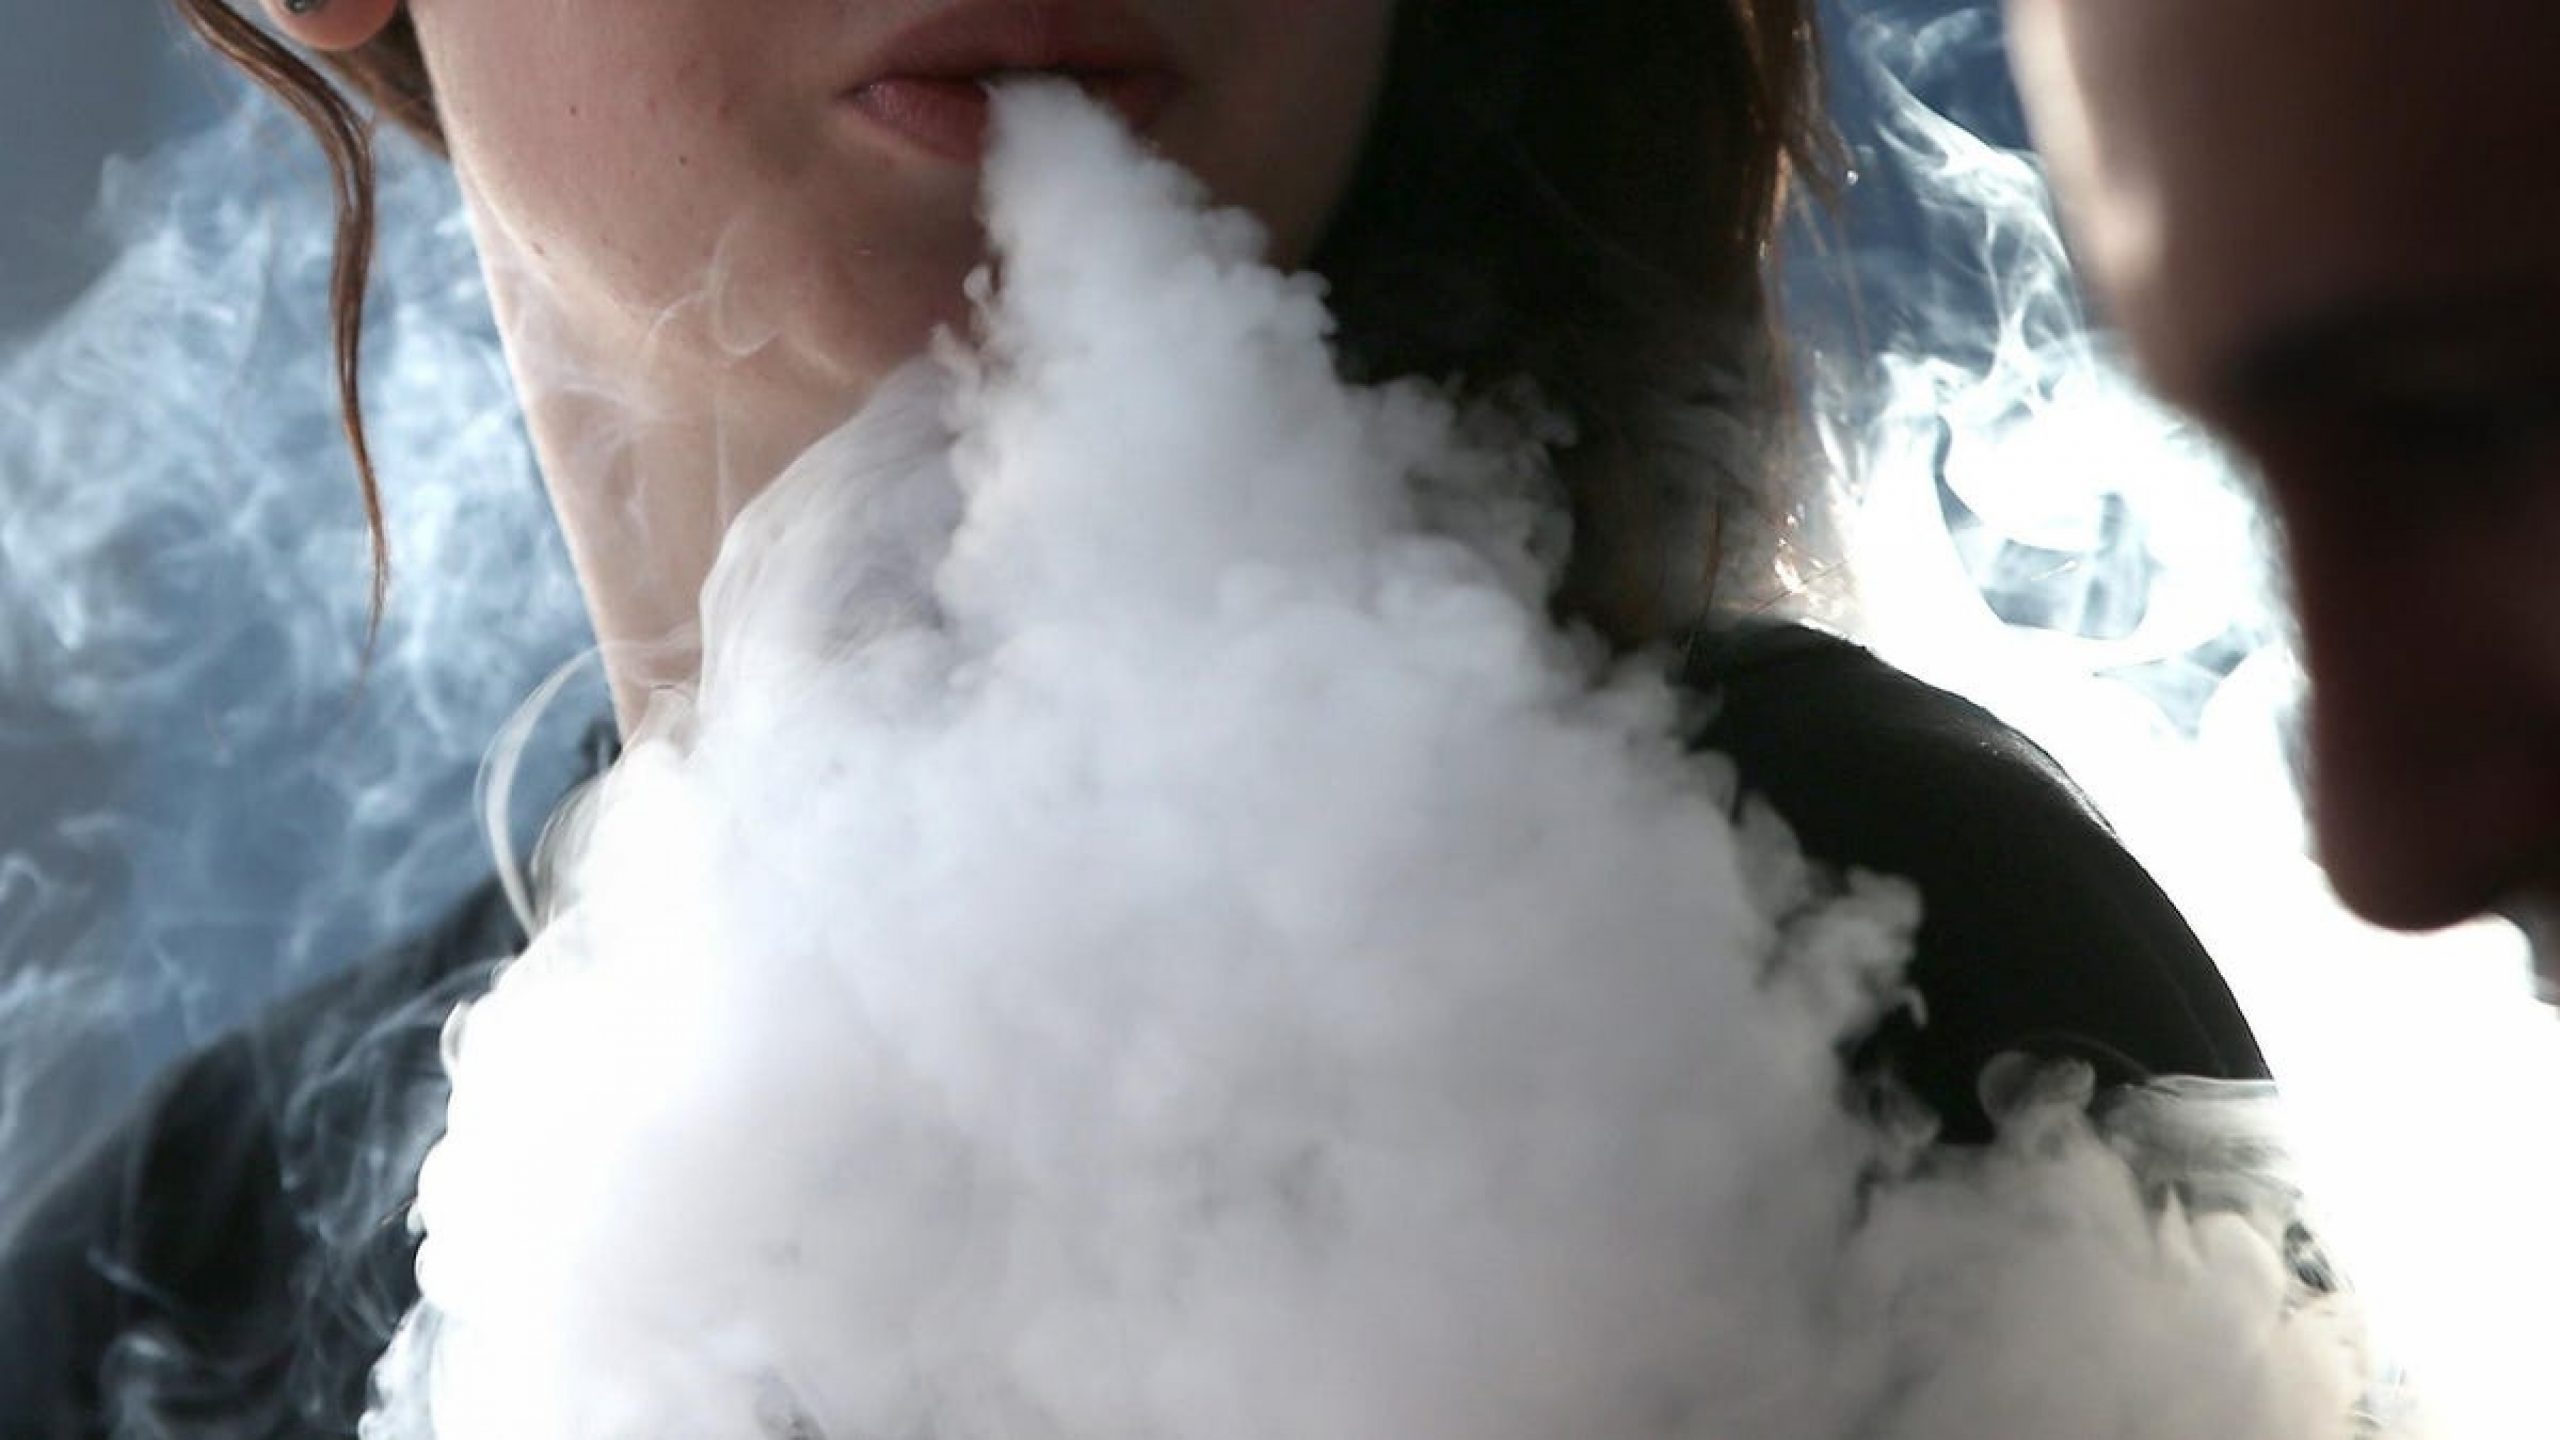 Woman Hospitalized With ‘Covid-19’ Was Actually Suffering a Vaping Injury